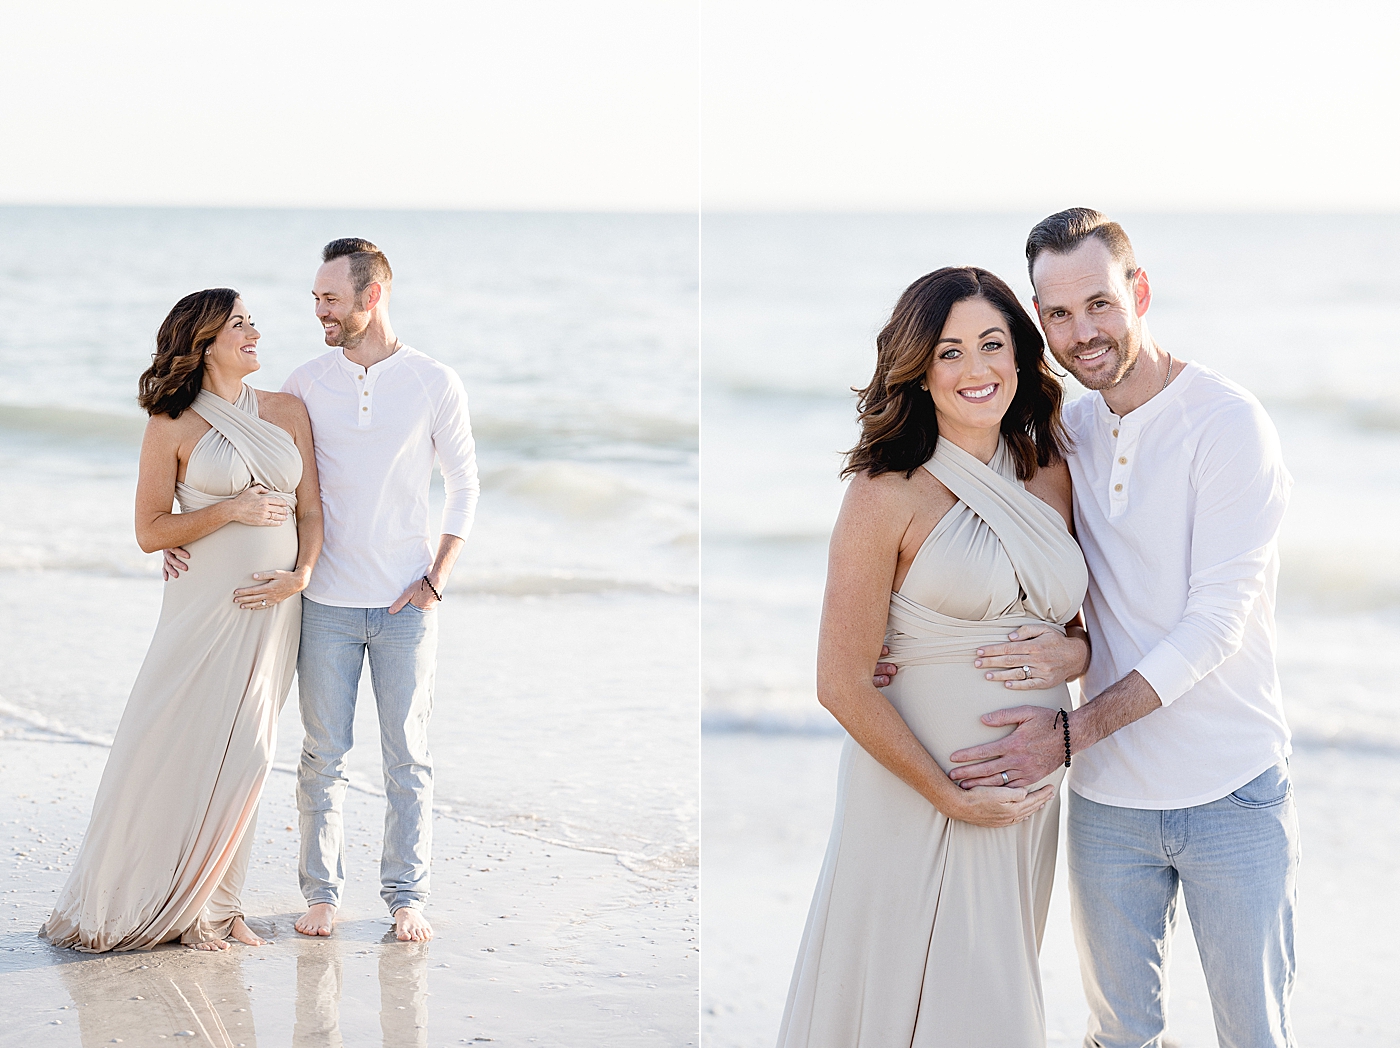 Beach maternity session in Tampa. Photo by Brittany Elise Photography.